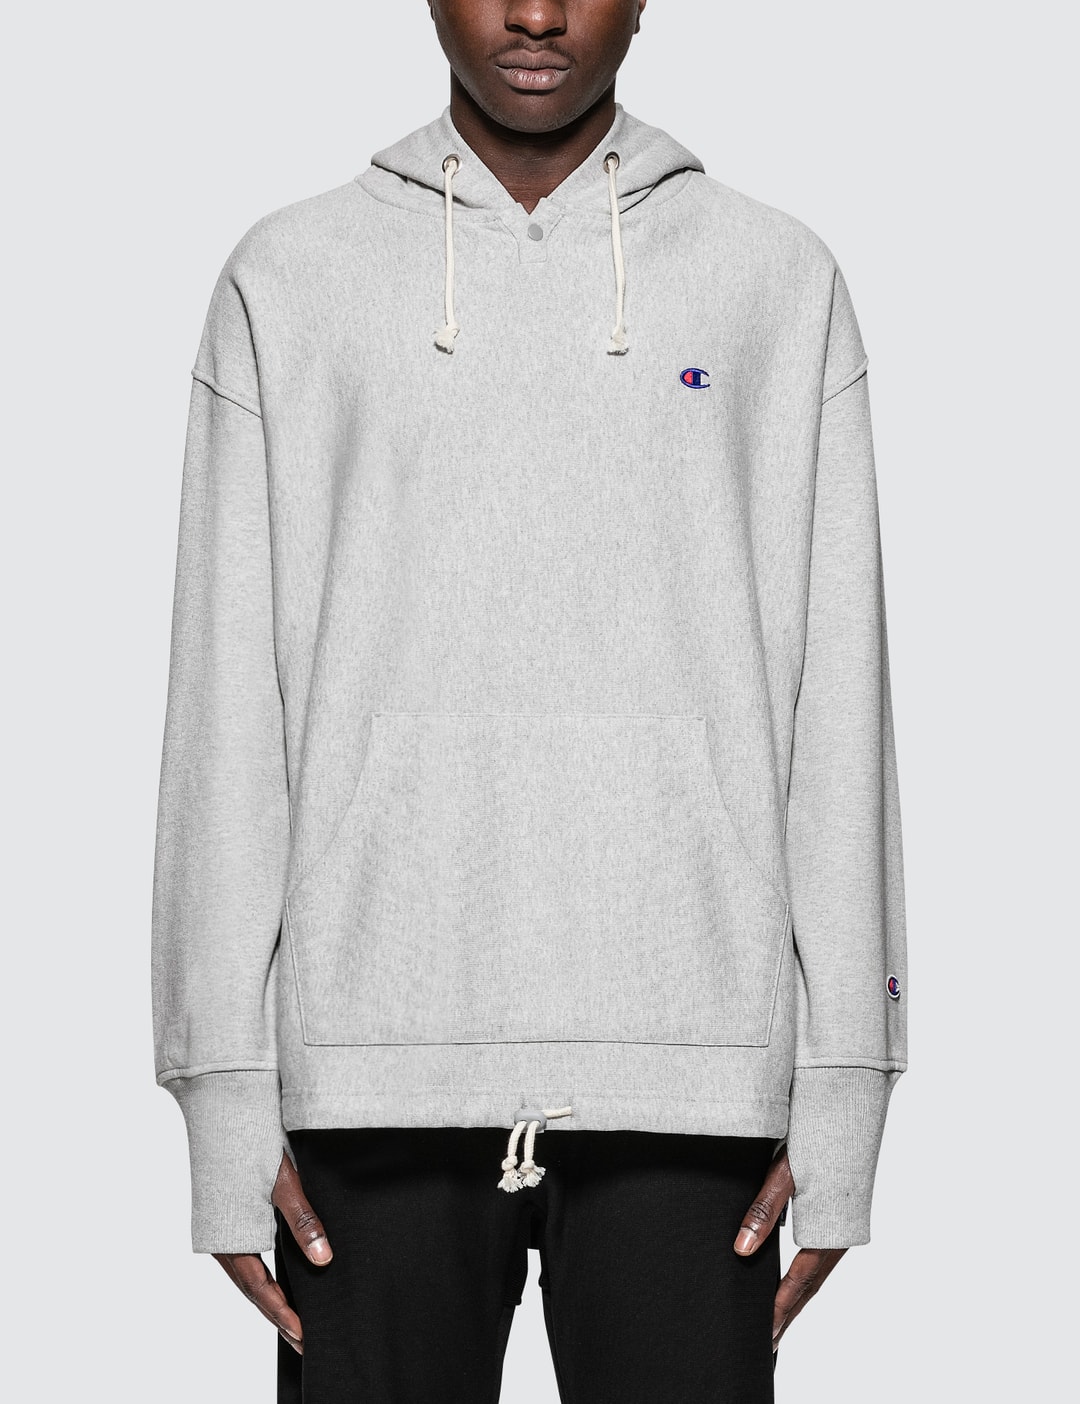 Champion Reverse Weave Beams x Champion Hoodie | HBX - Globally Curated Fashion Lifestyle by Hypebeast